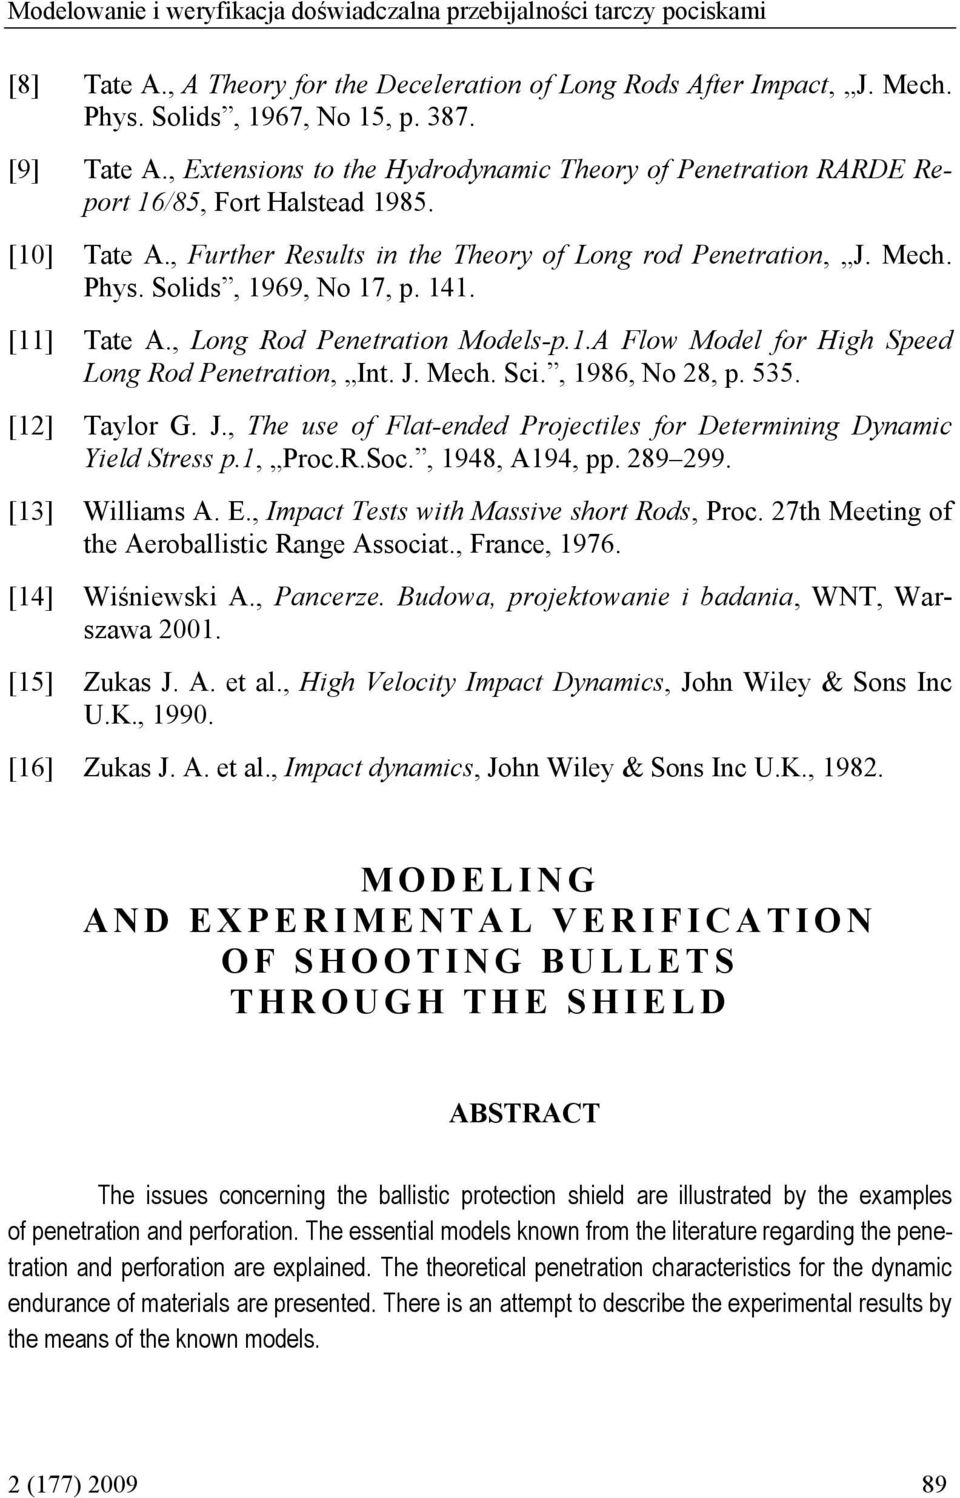 141. [11] ate A., Long Rod Penetration Models-.1.A Flow Model for High Seed Long Rod Penetration, Int. J. Mech. Sci., 1986, No 8,. 535. [1] aylor G. J., he use of Flat-ended Projectiles for Determining Dynamic Yield Stress.